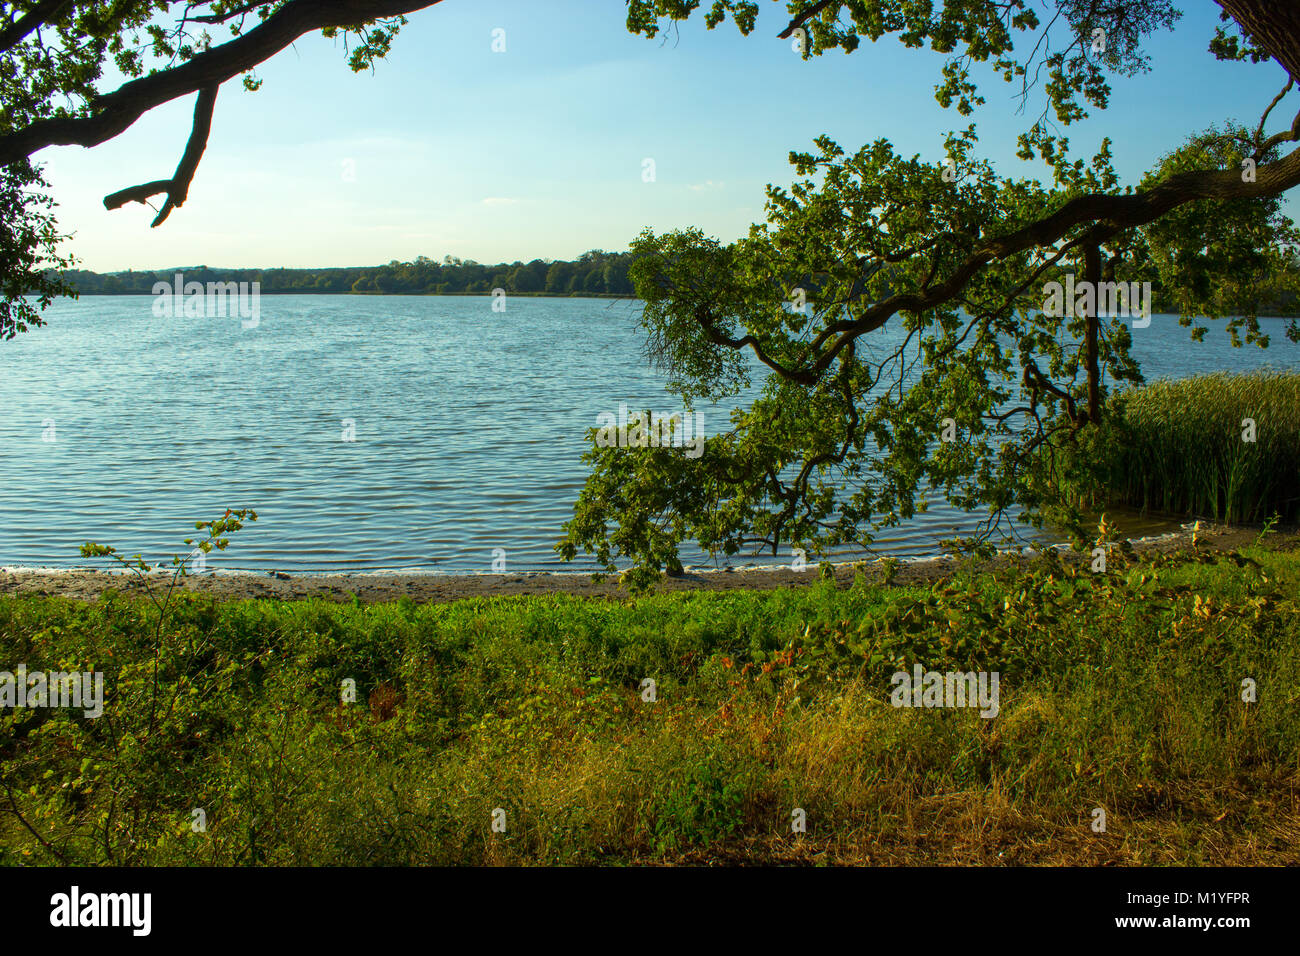 A view of the lake over the trees. On the background is blue sky. Stock Photo